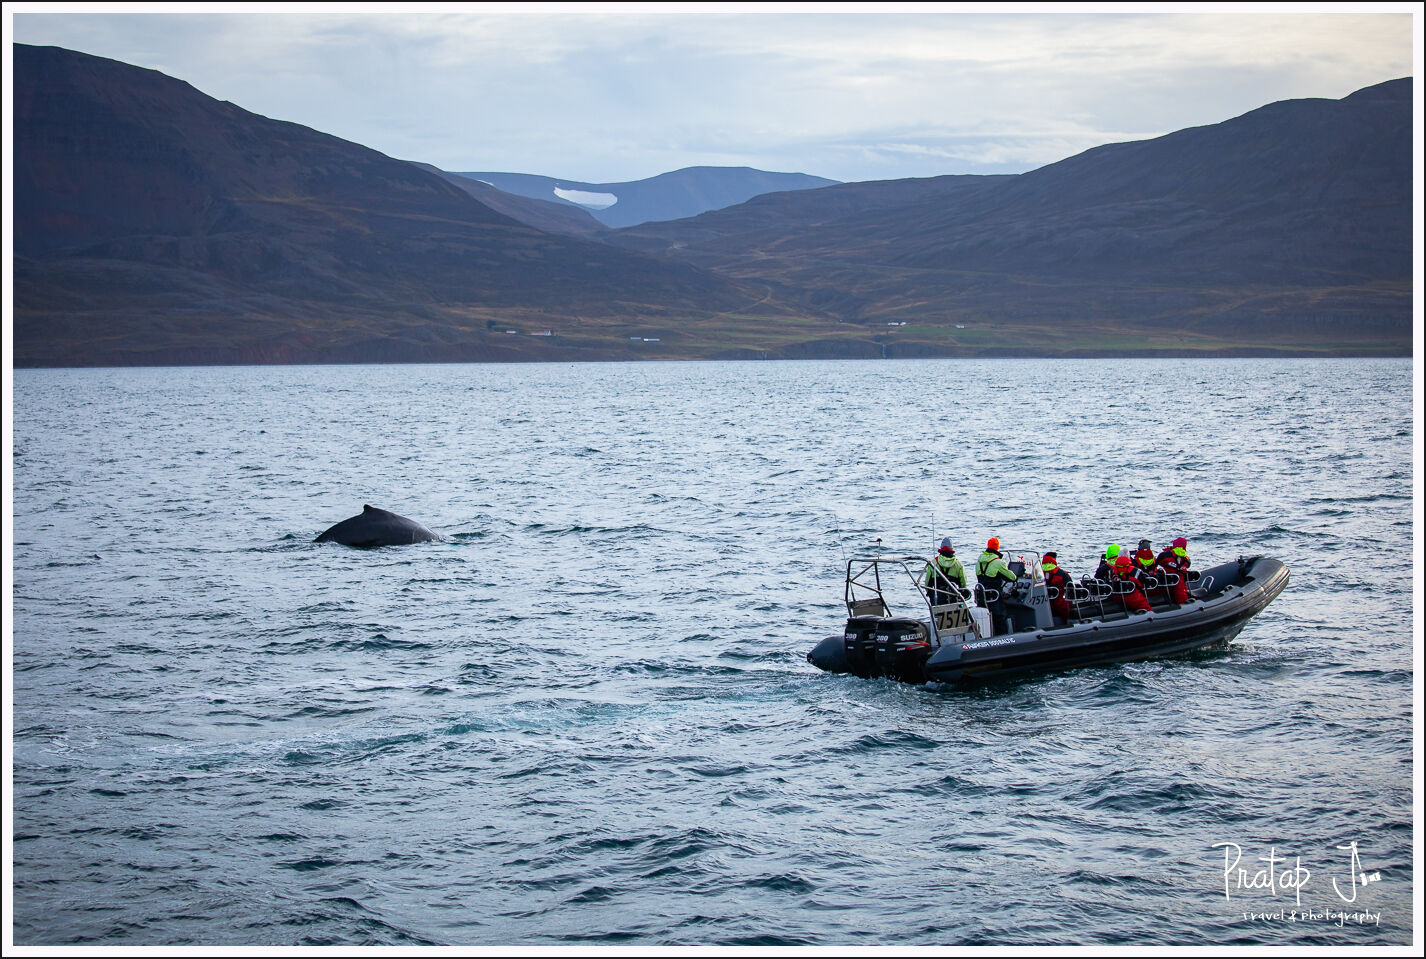 RIB Boat and Hump Back Whale in Iceland